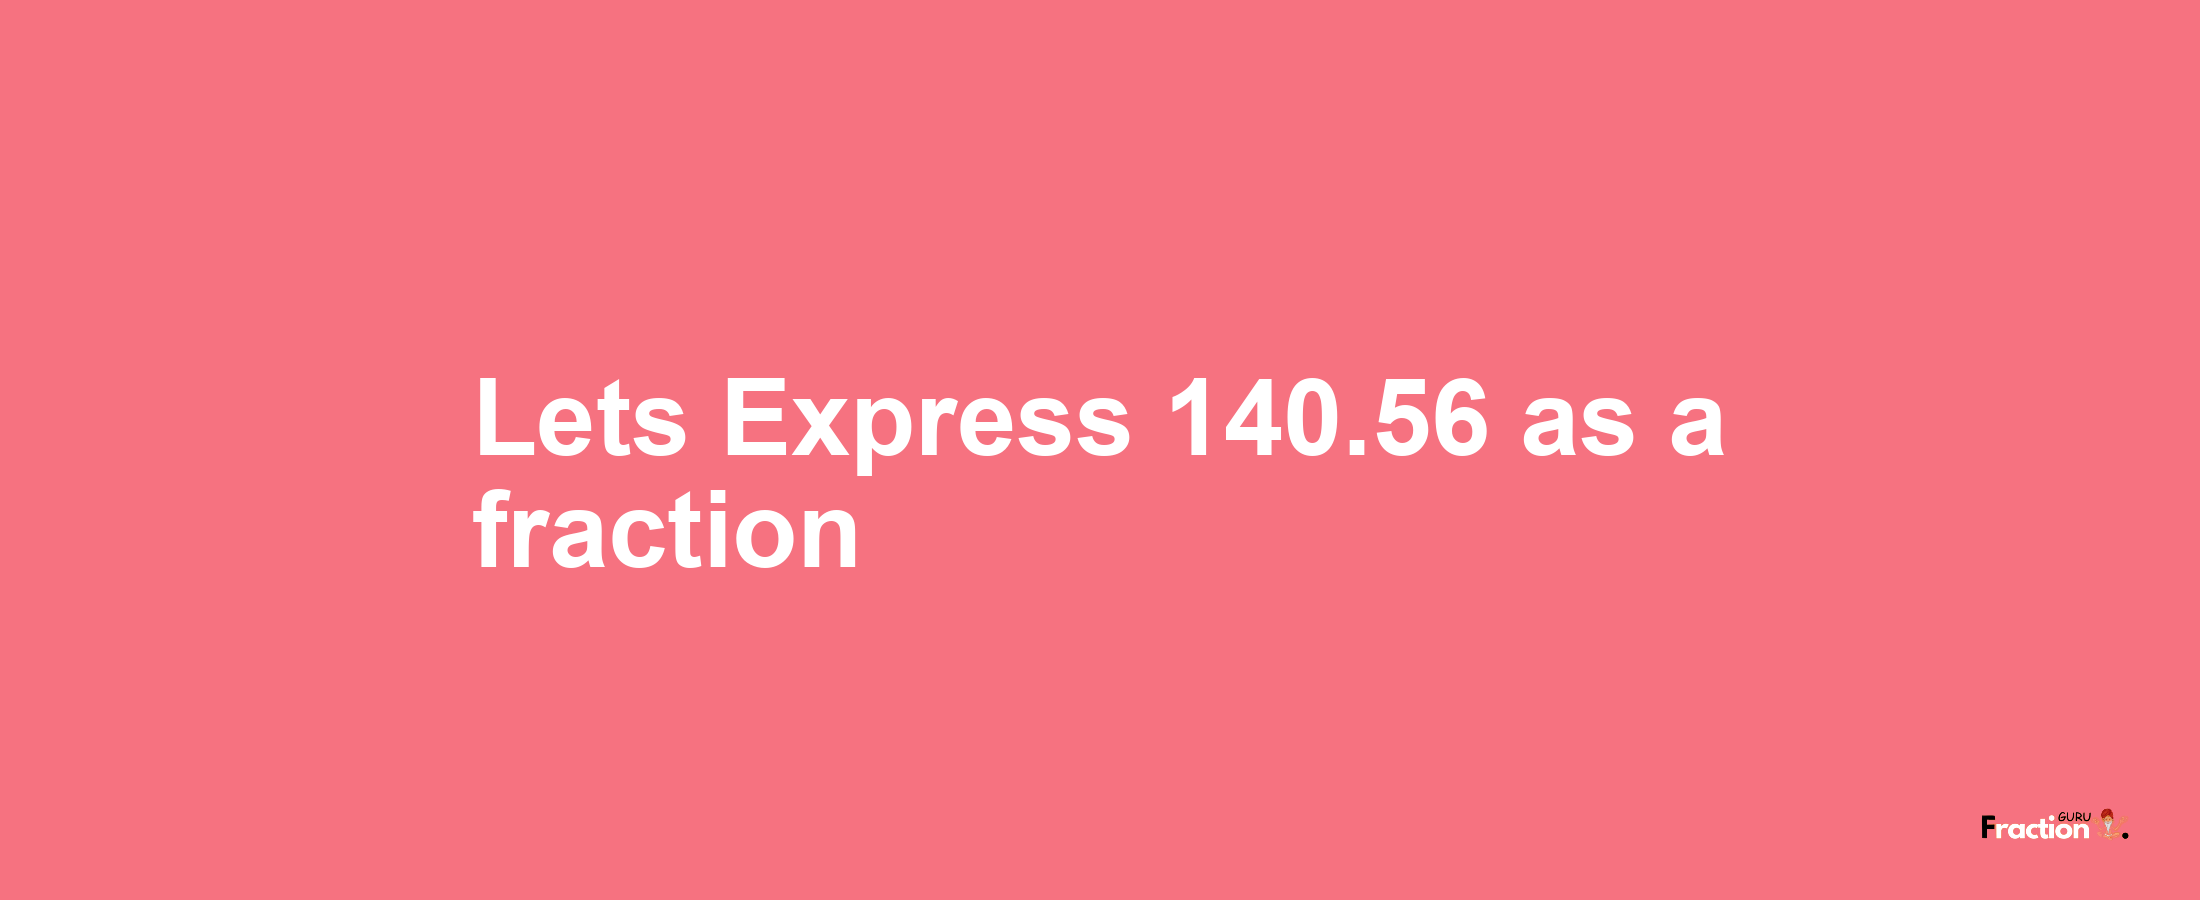 Lets Express 140.56 as afraction